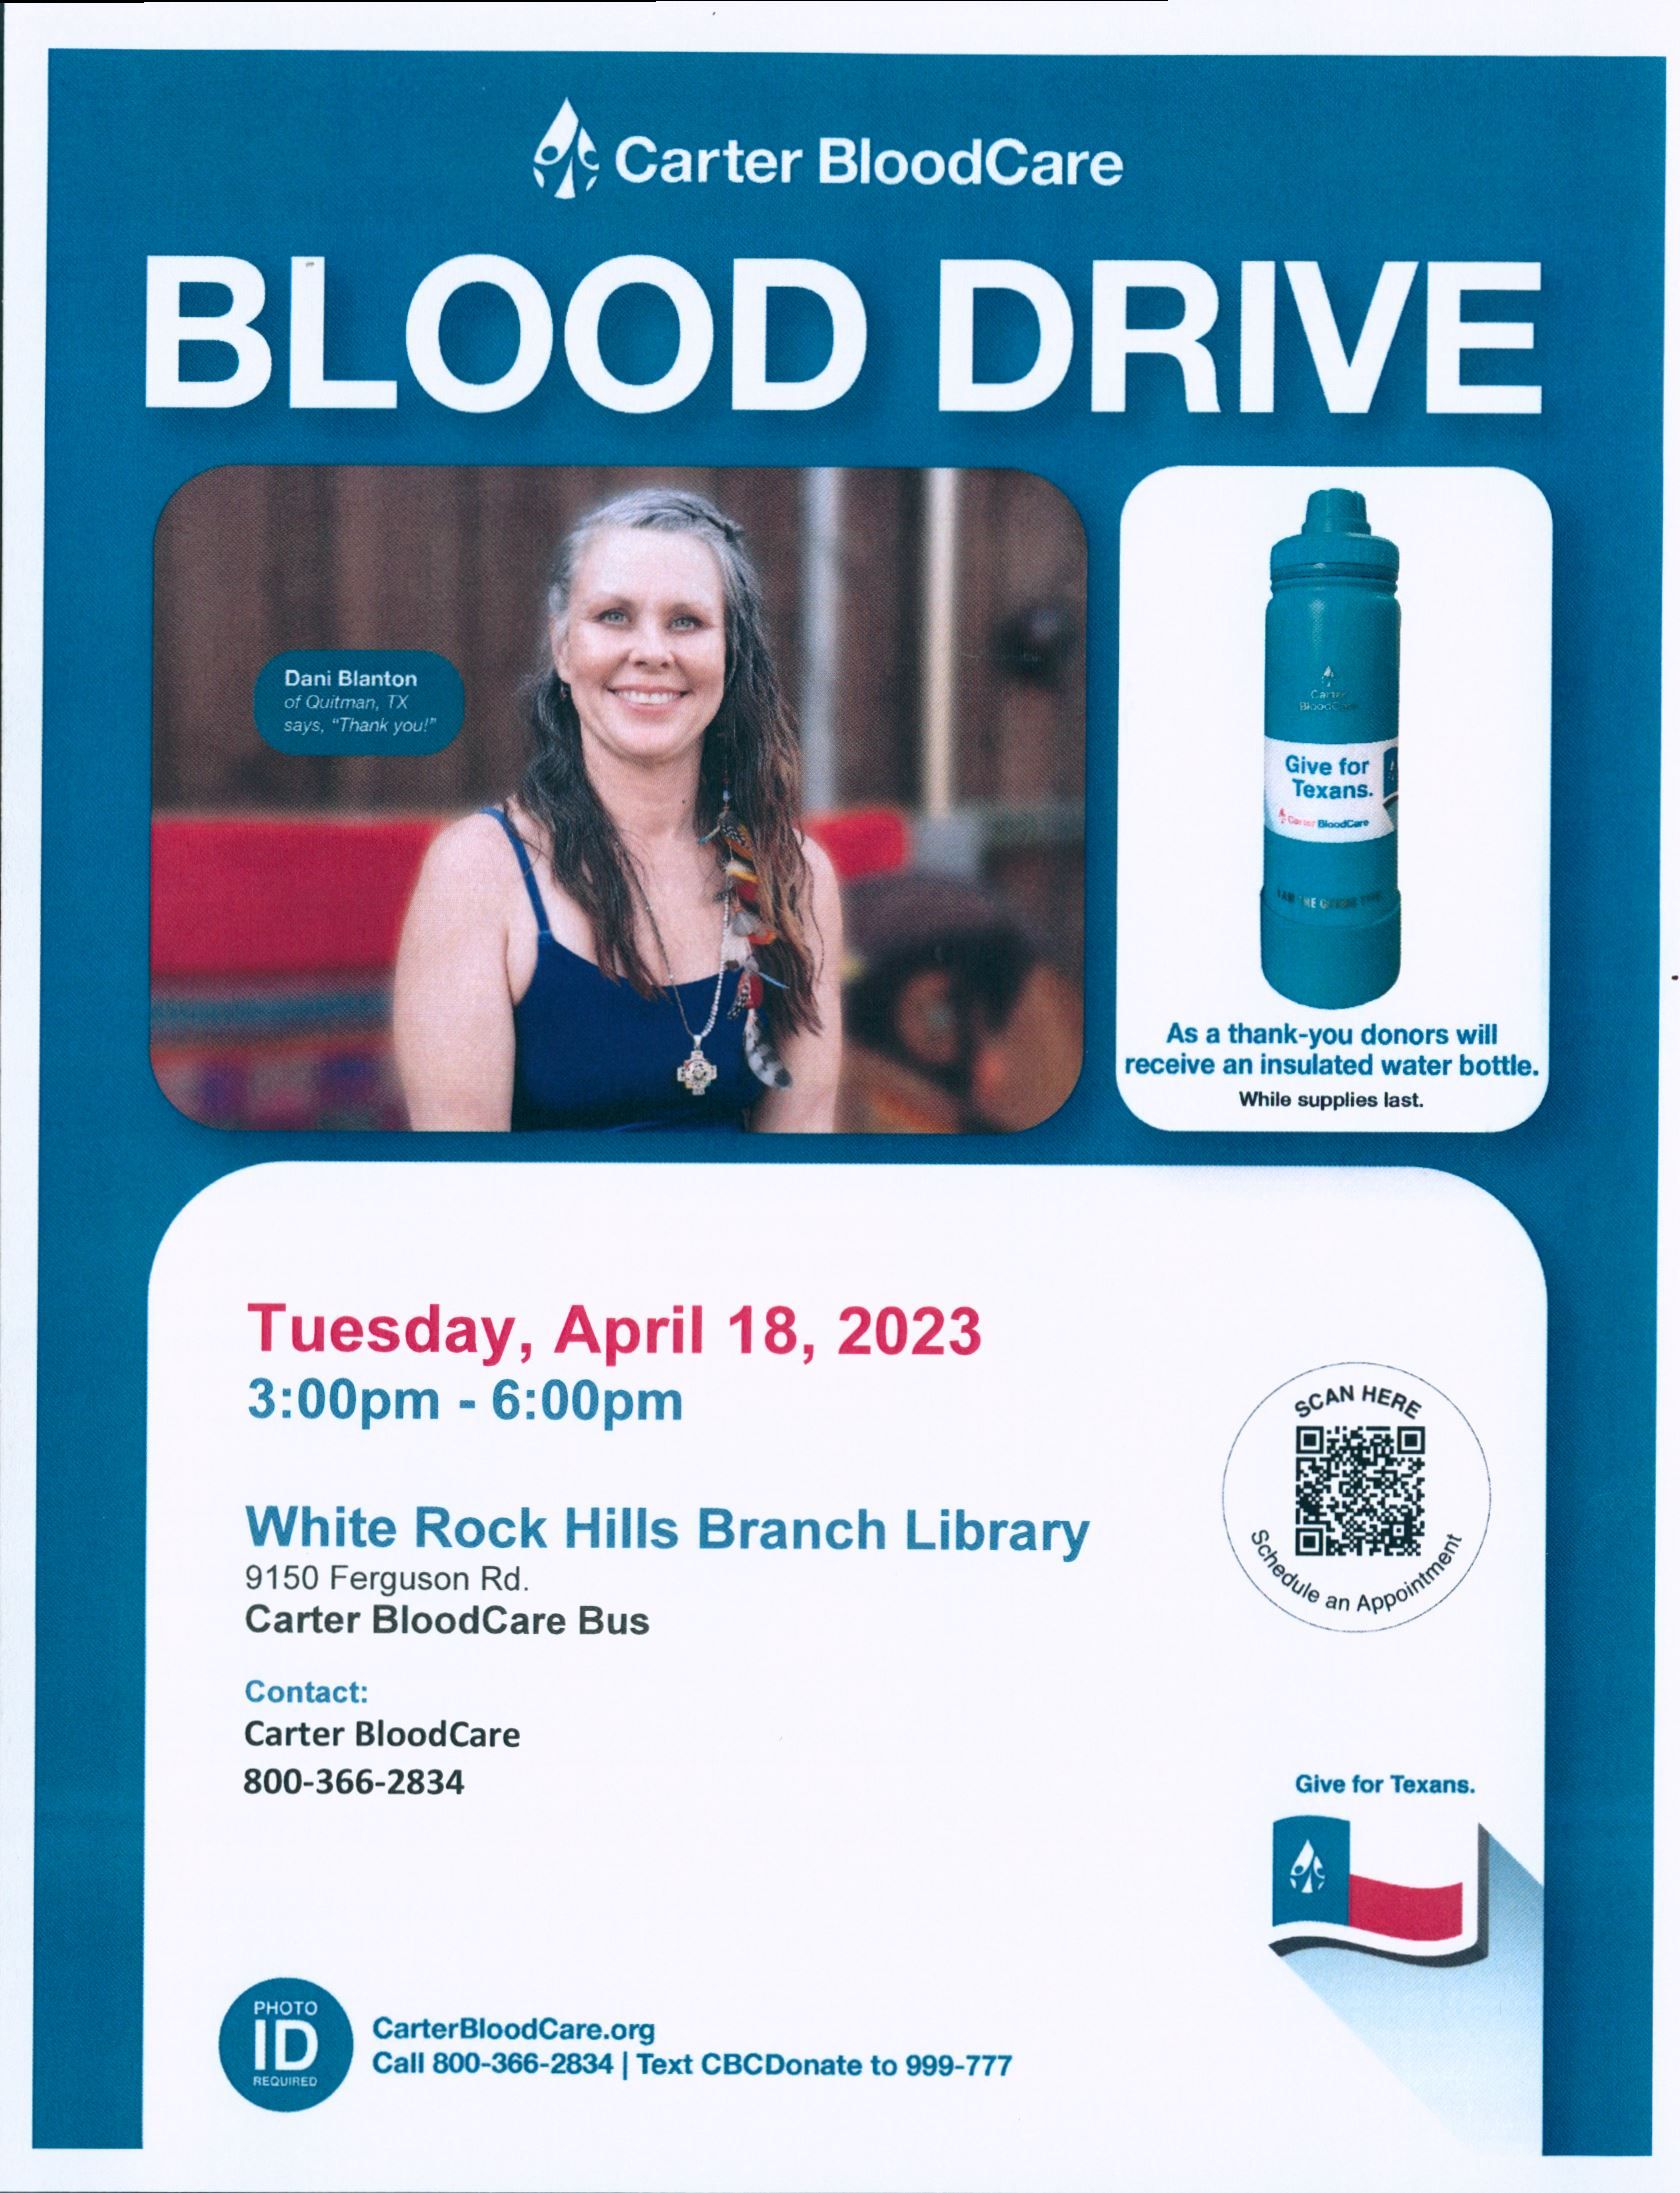 Blood Drive April 18, 2023 from 3-6pm at the White Rock Hills Branch Library